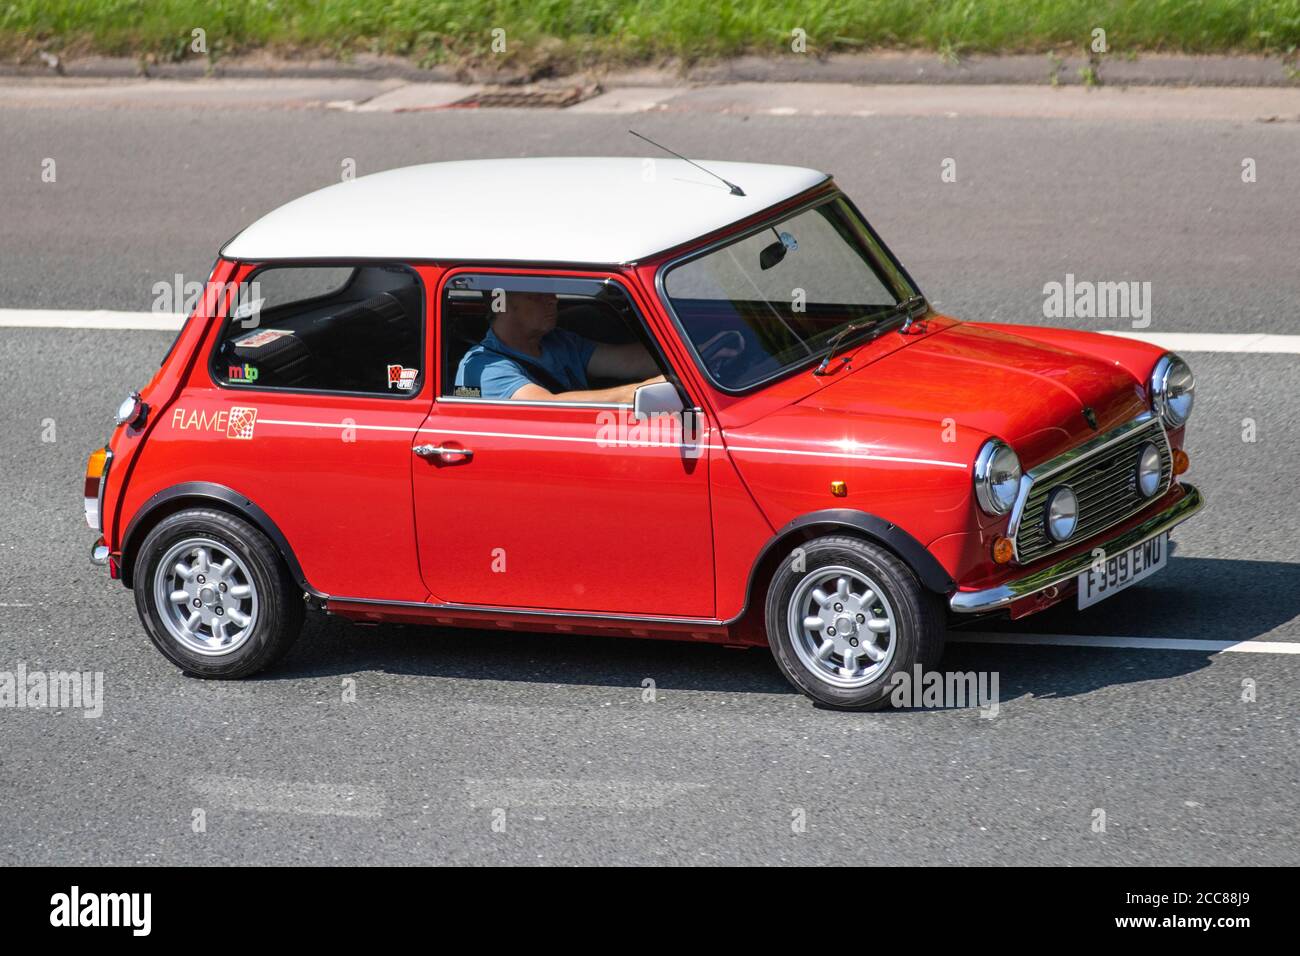 1989 80s red white old type Austin Mini Racing Flame; Vehicular traffic moving vehicles, 80s cars driving vehicle on UK roads, motors, motoring on the M6 motorway highway network. Stock Photo